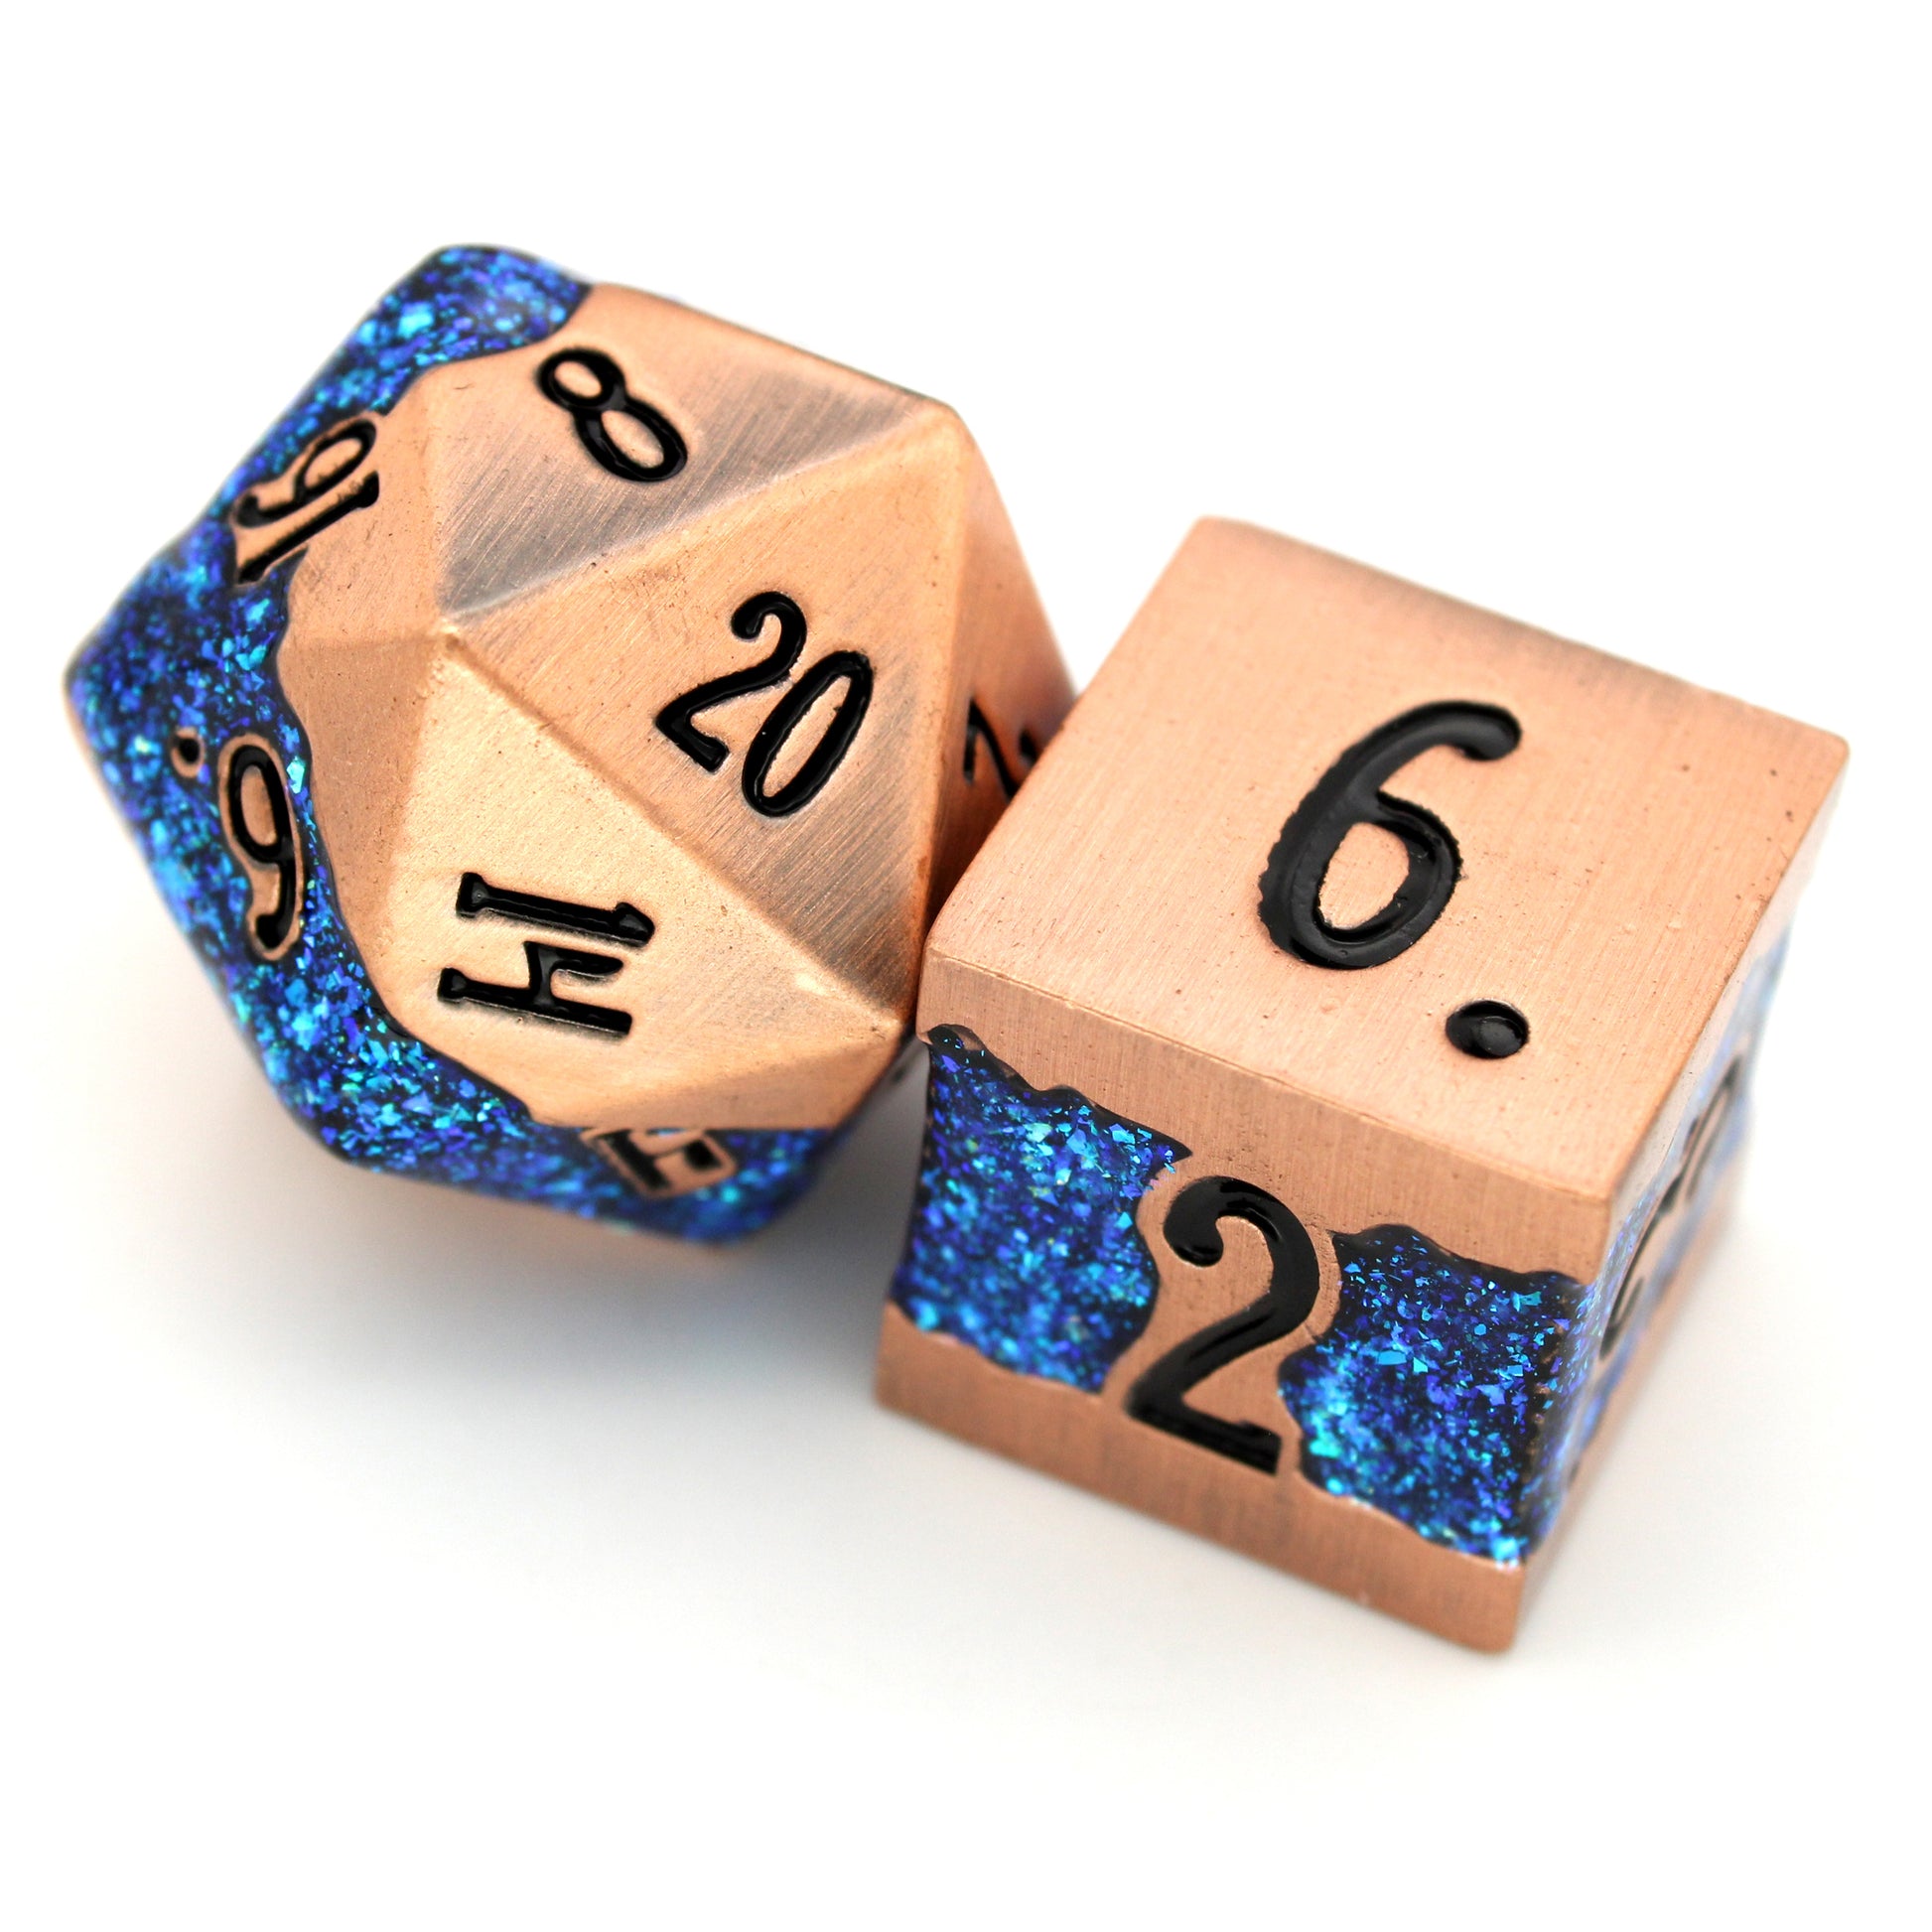 Rolling River is a 7-piece metal dice set with a rich copper frame and brilliantly glittering teal-blue enamel.